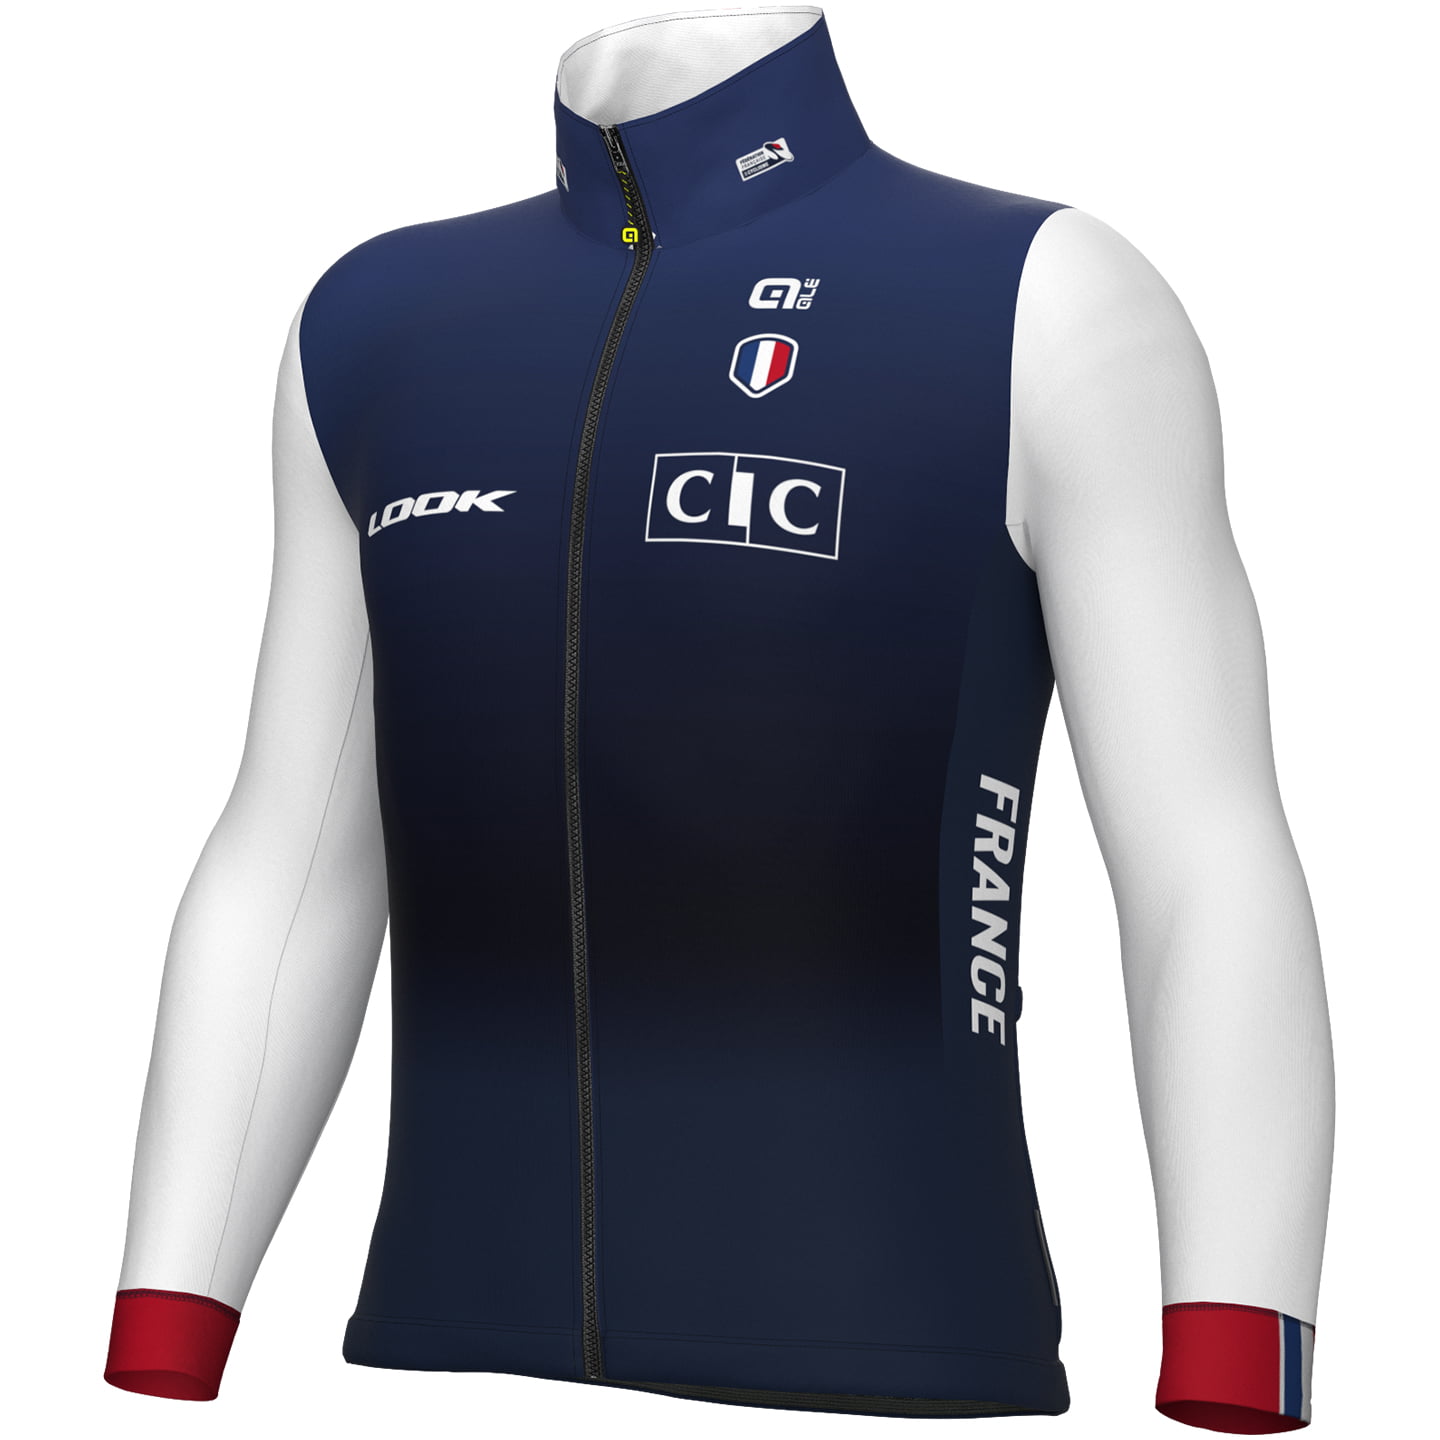 FRENCH NATIONAL TEAM 2023 Thermal Jacket, for men, size L, Cycle jacket, Cycle gear